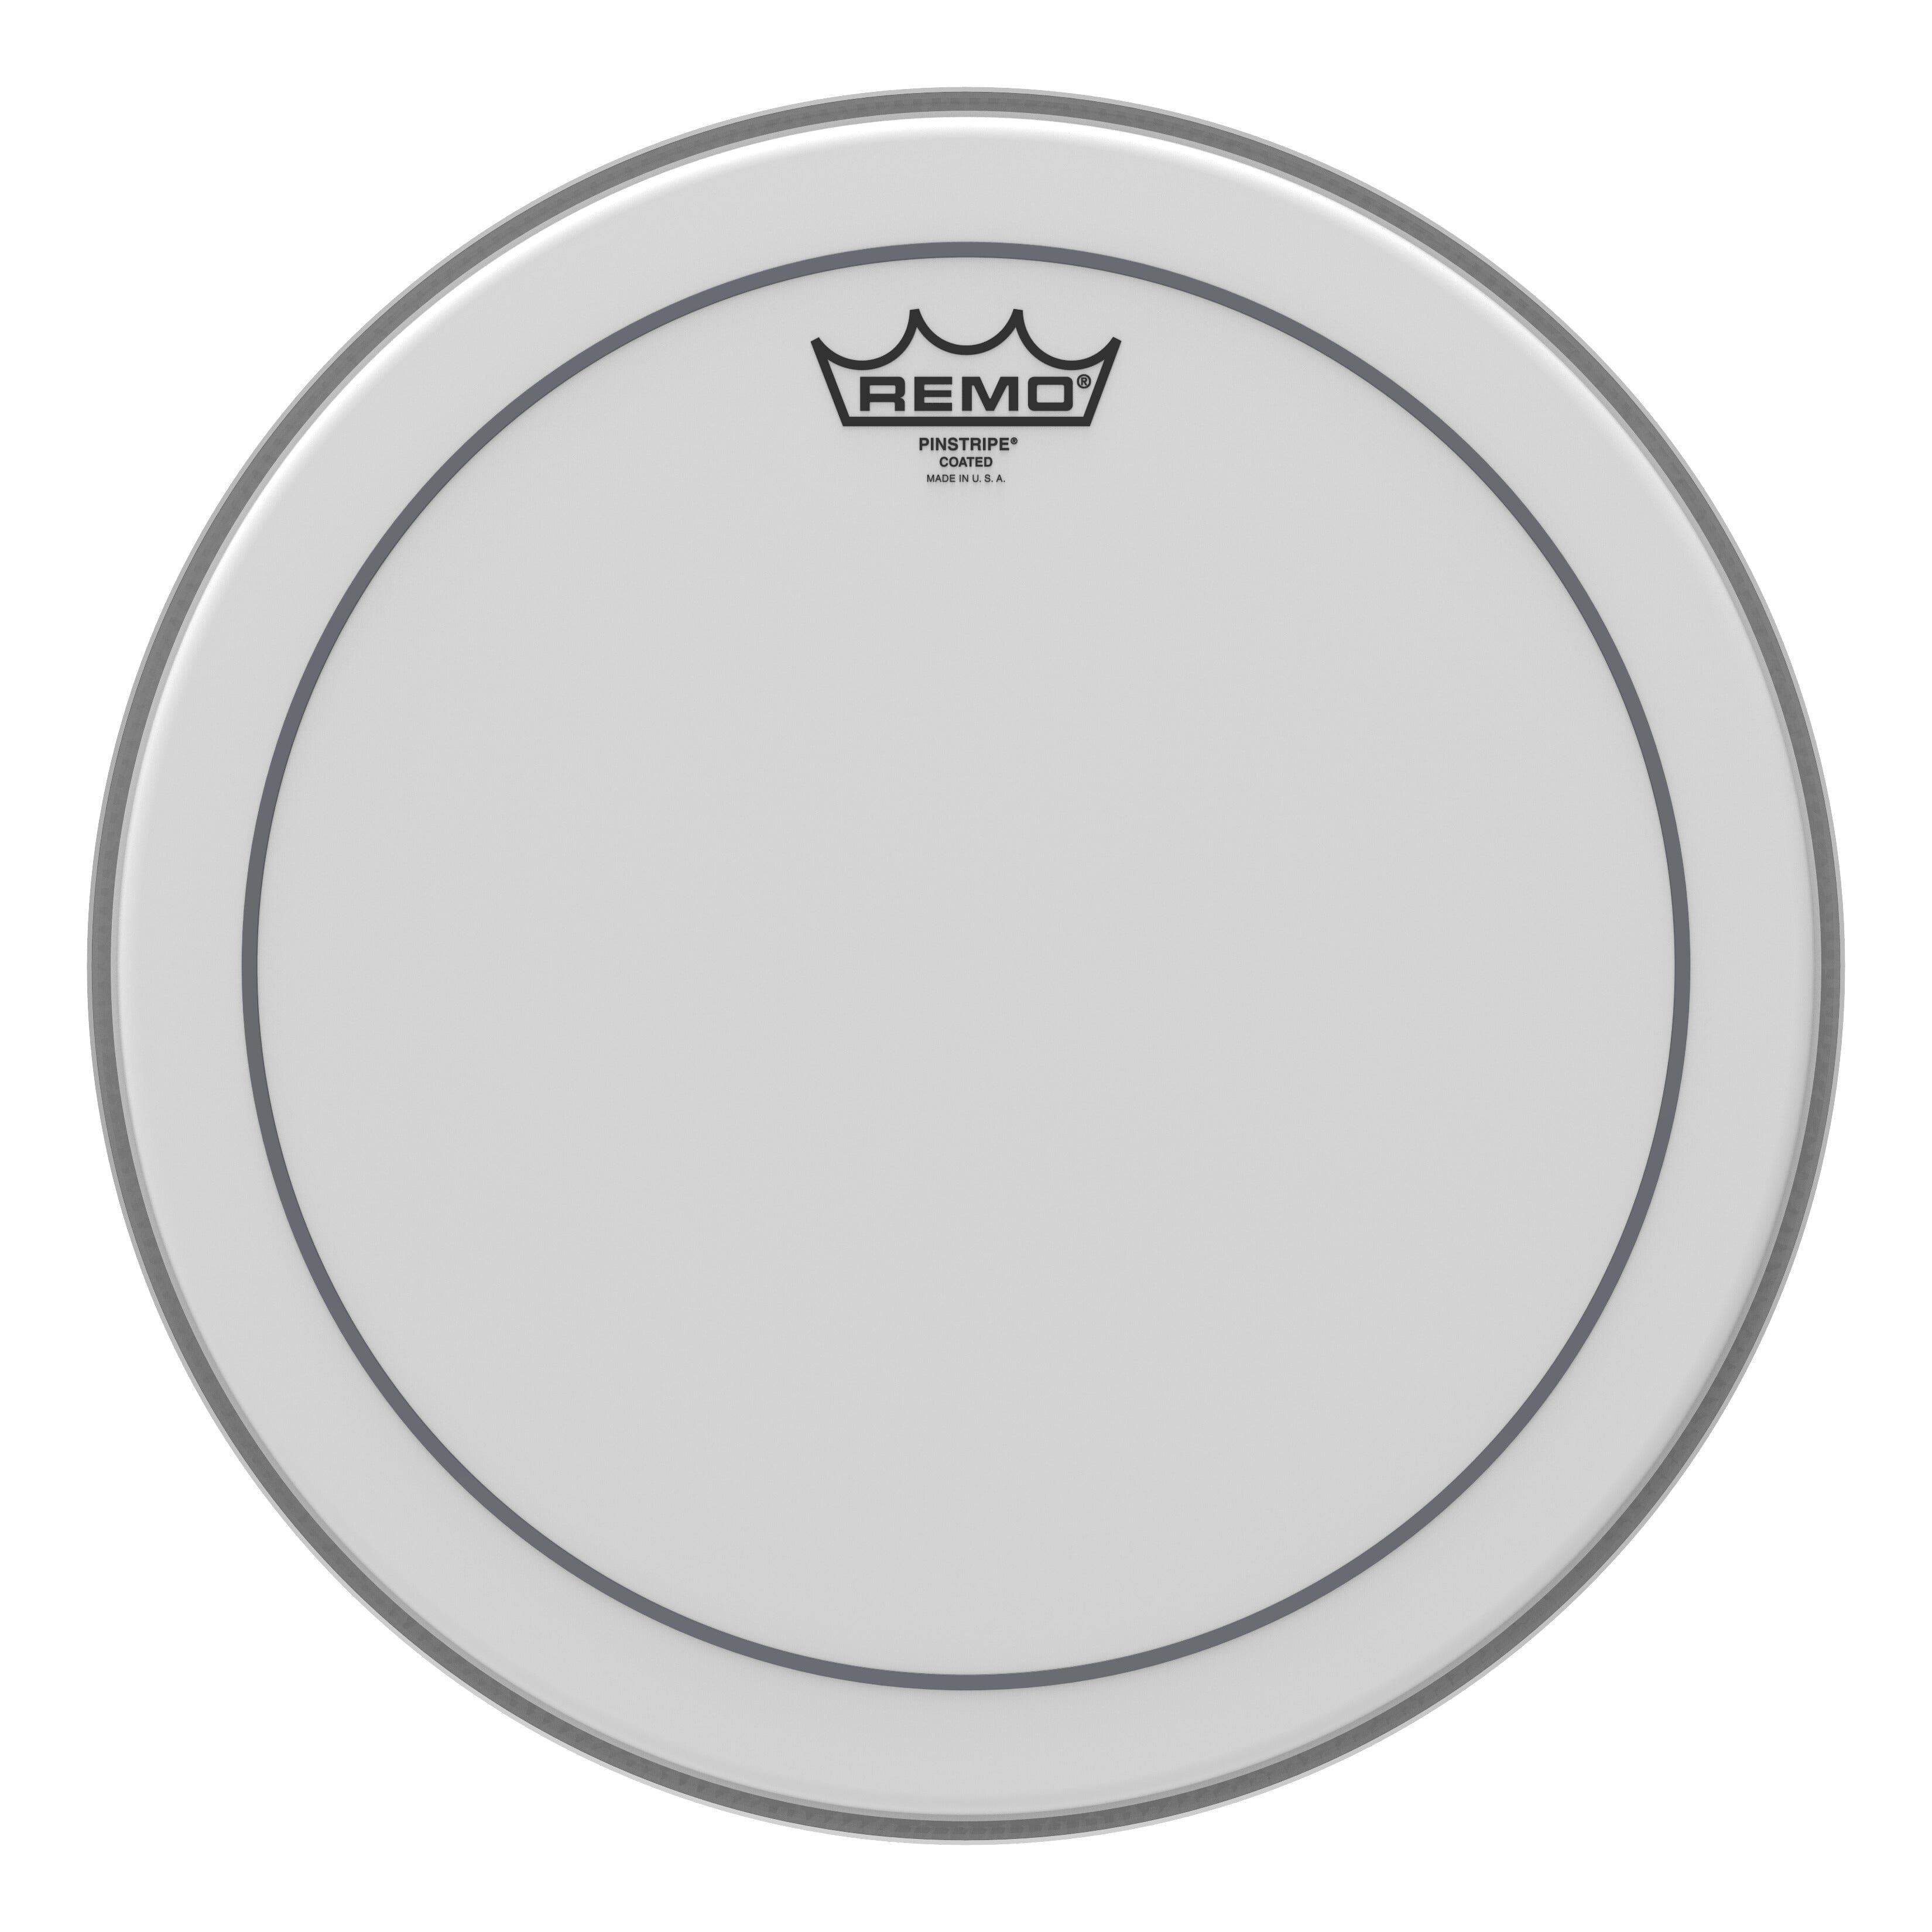 Remo Pinstripe 14" Coated Batter Drum Head (PS-0114-00) Drum Heads Remo 